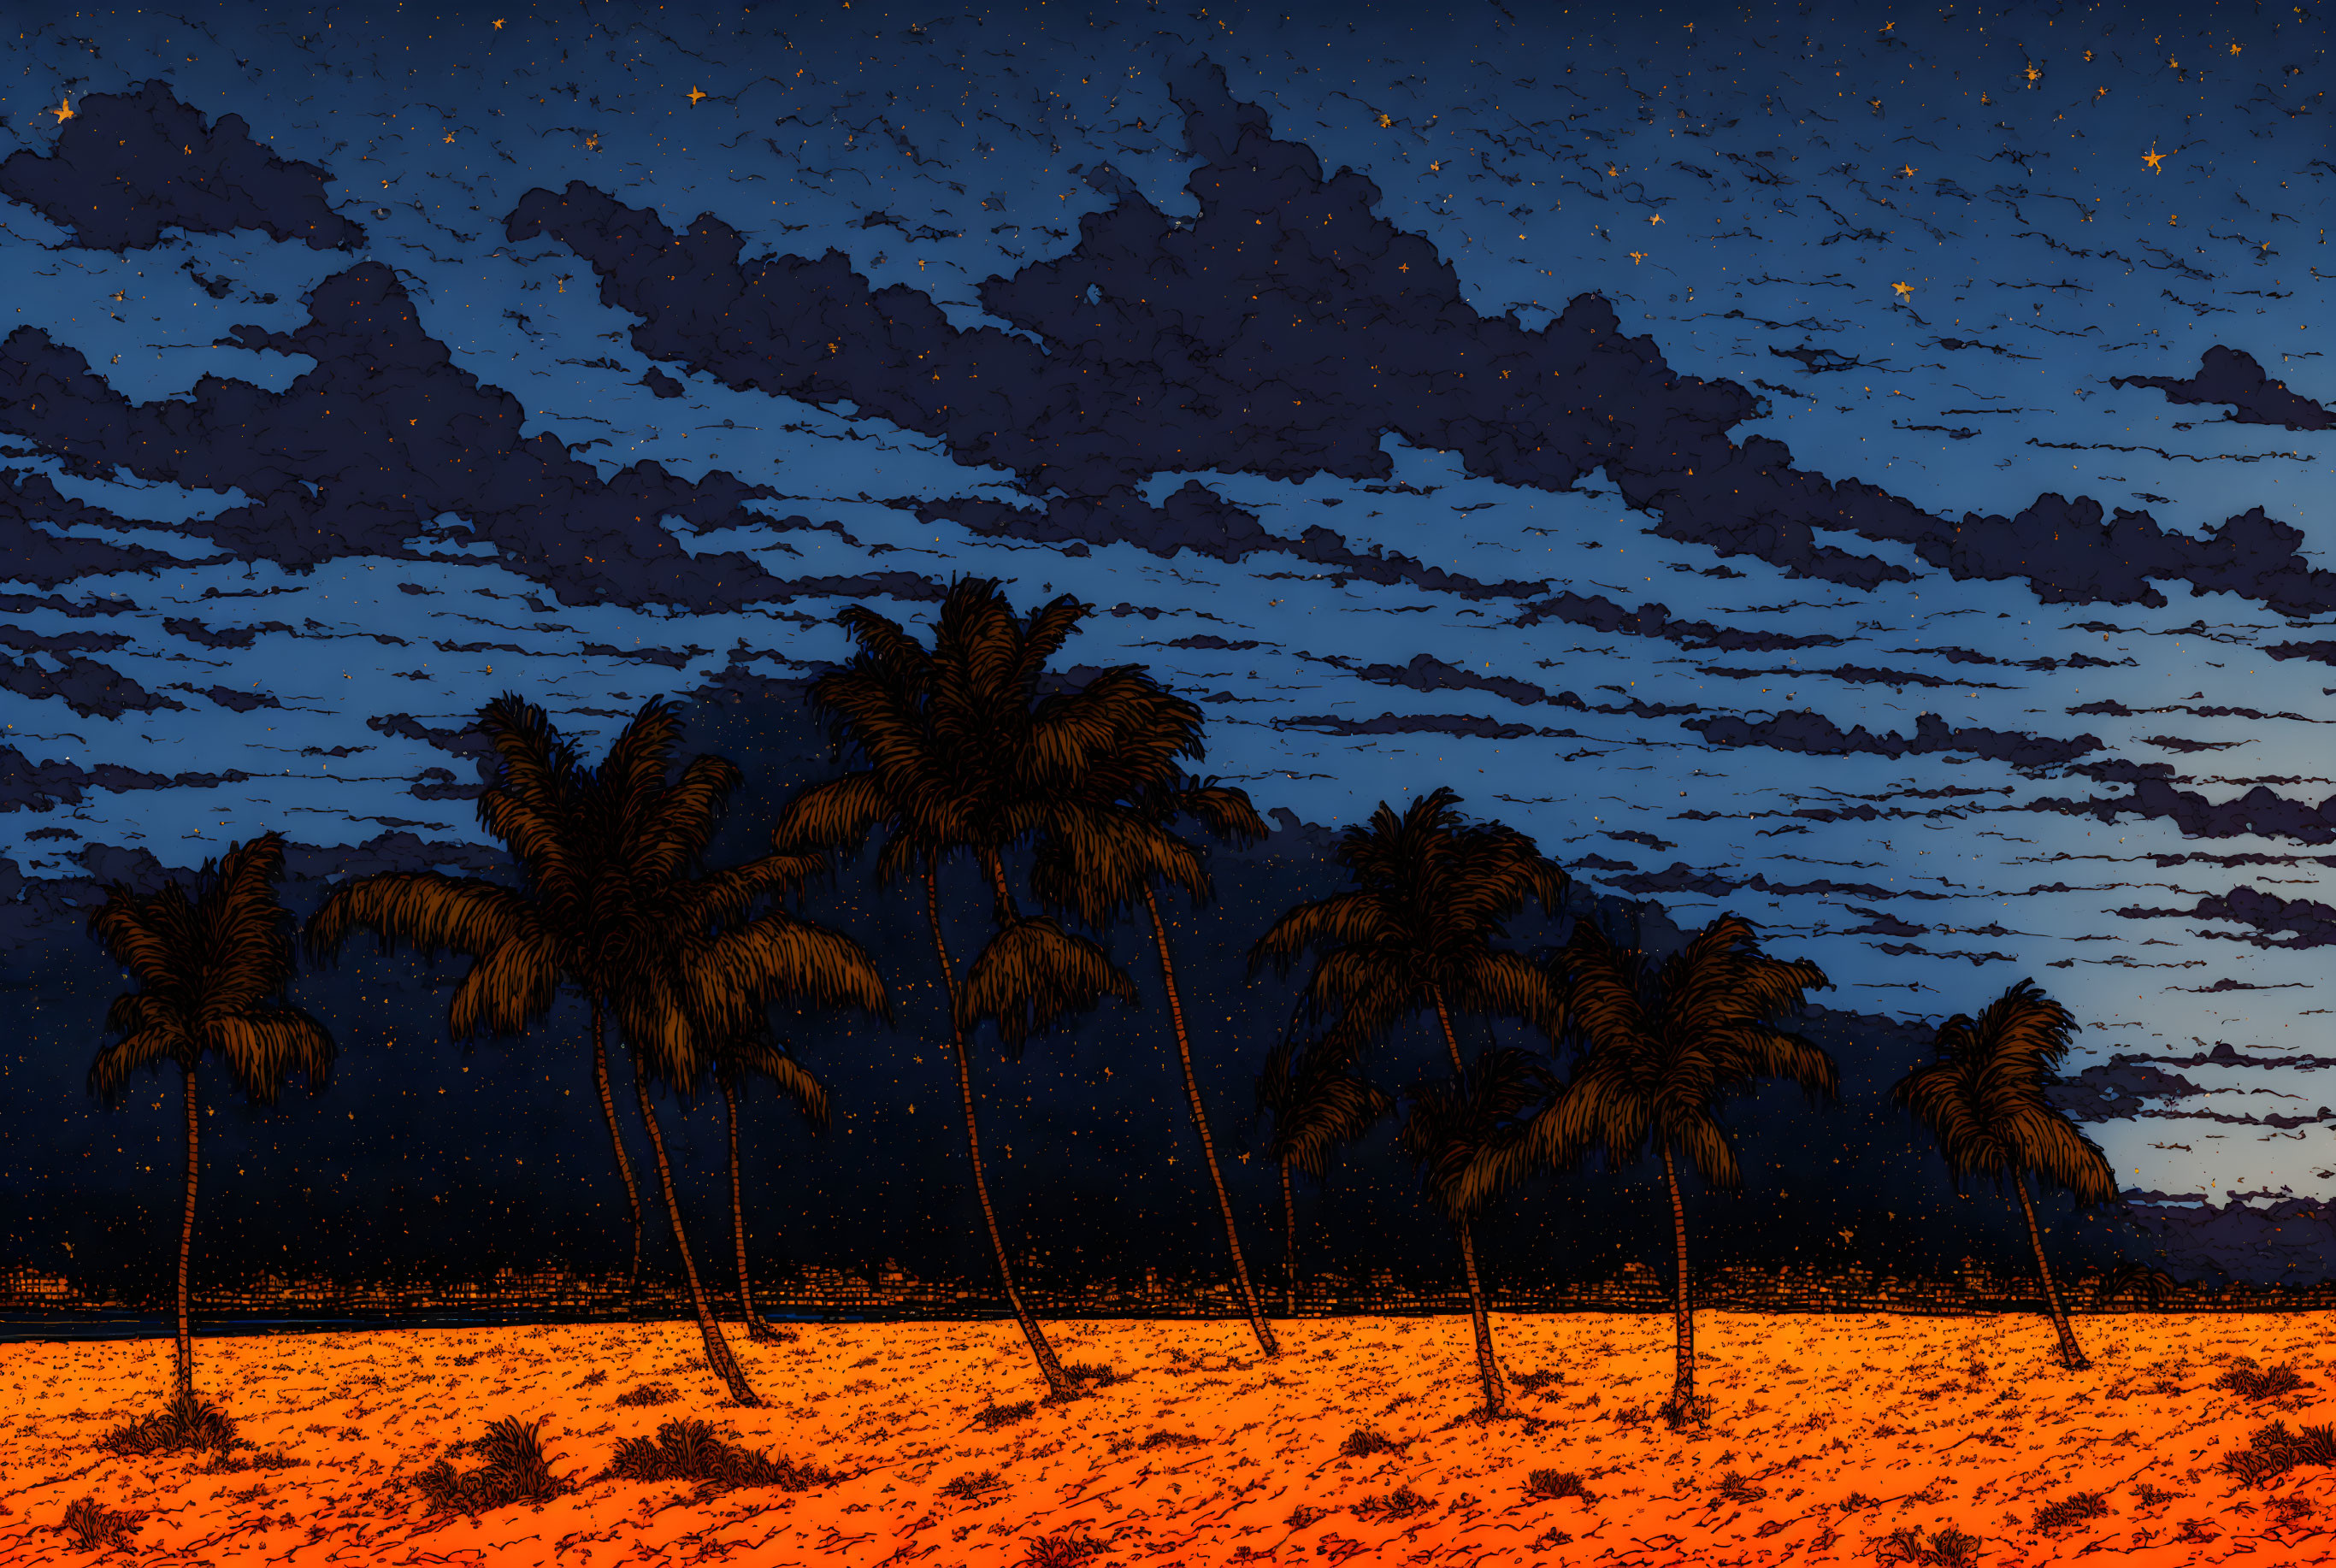 Stylized digital art: Night scene with palm trees and starry sky